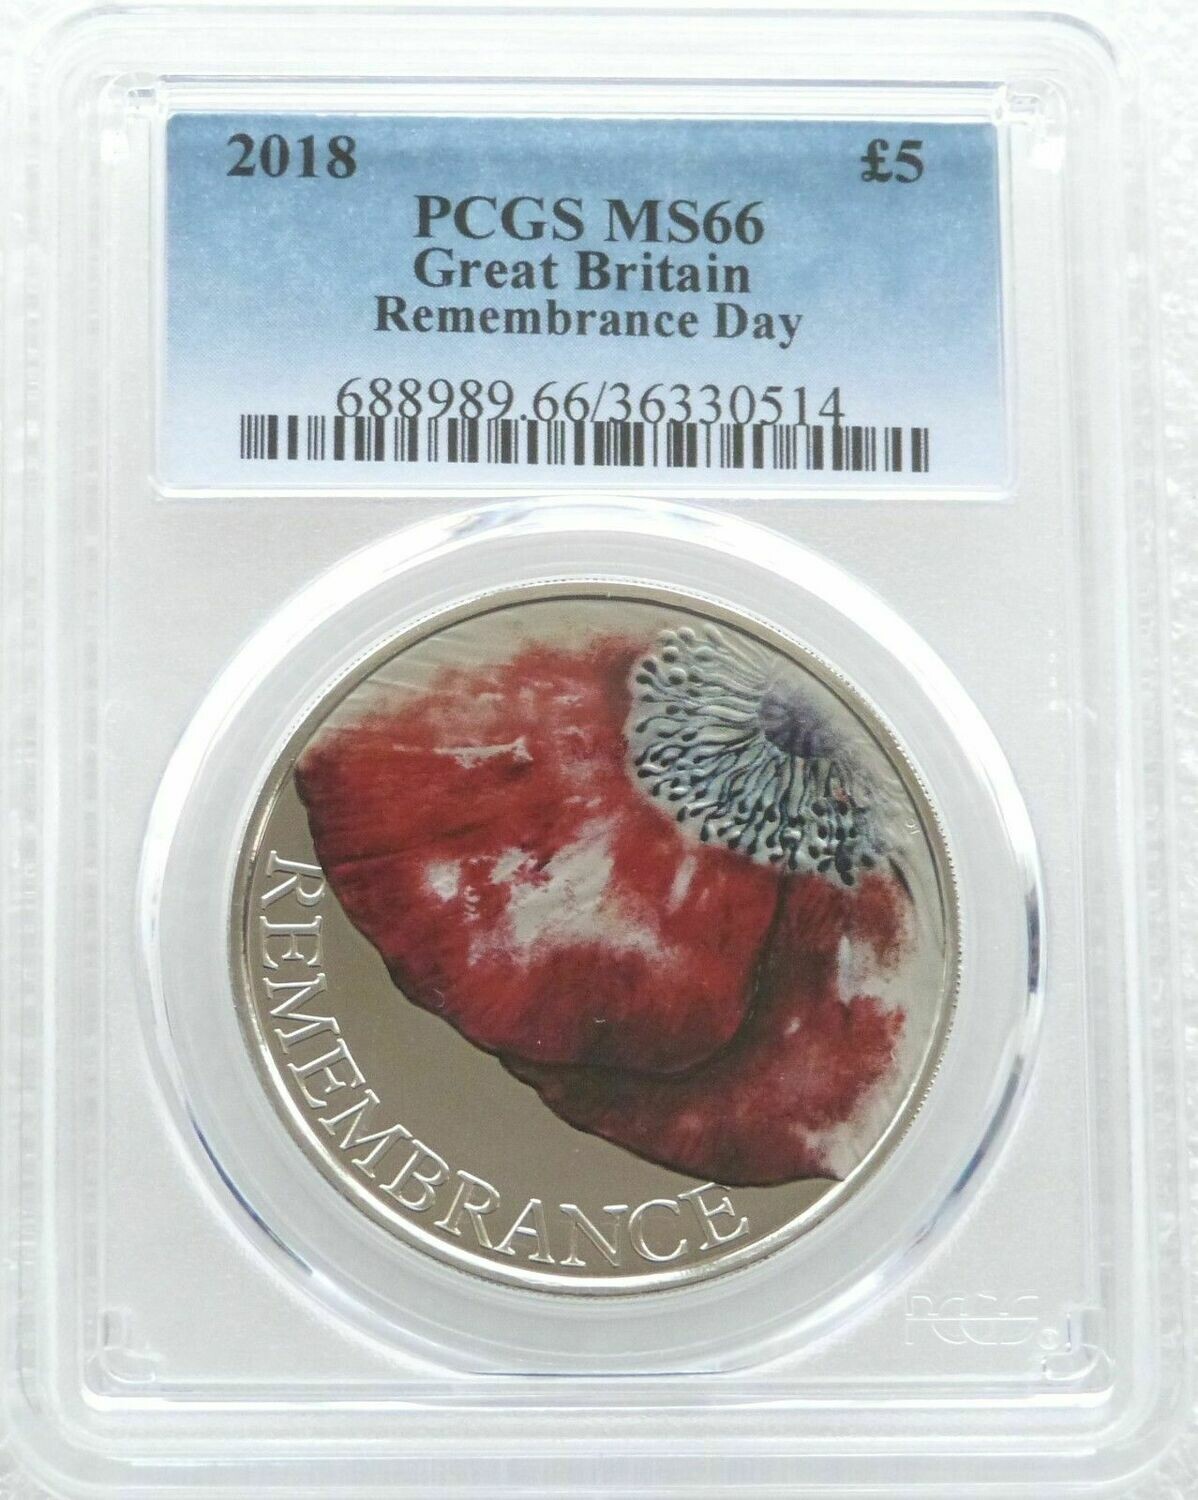 2018 Remembrance Day Poppy £5 Brilliant Uncirculated Coin PCGS MS66